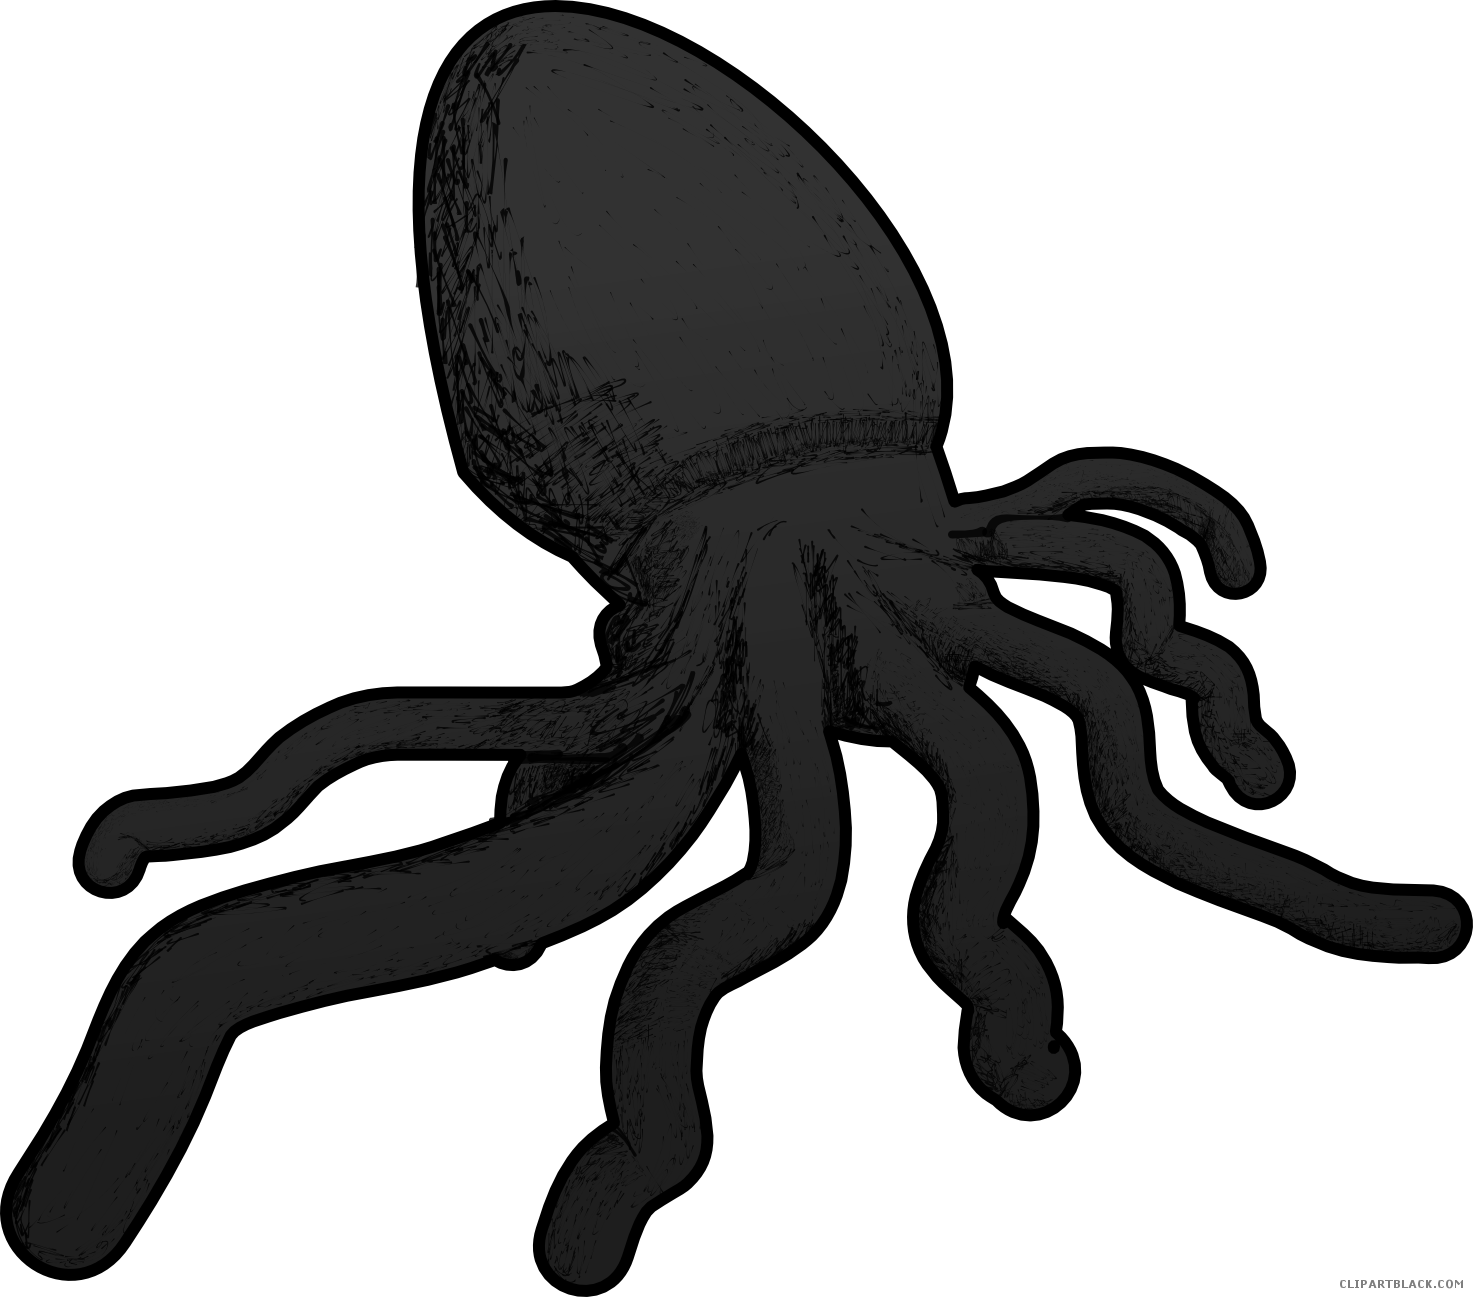 Octopus Animal Free Black White Clipart Images Clipartblack - Octopus (1473x1297)